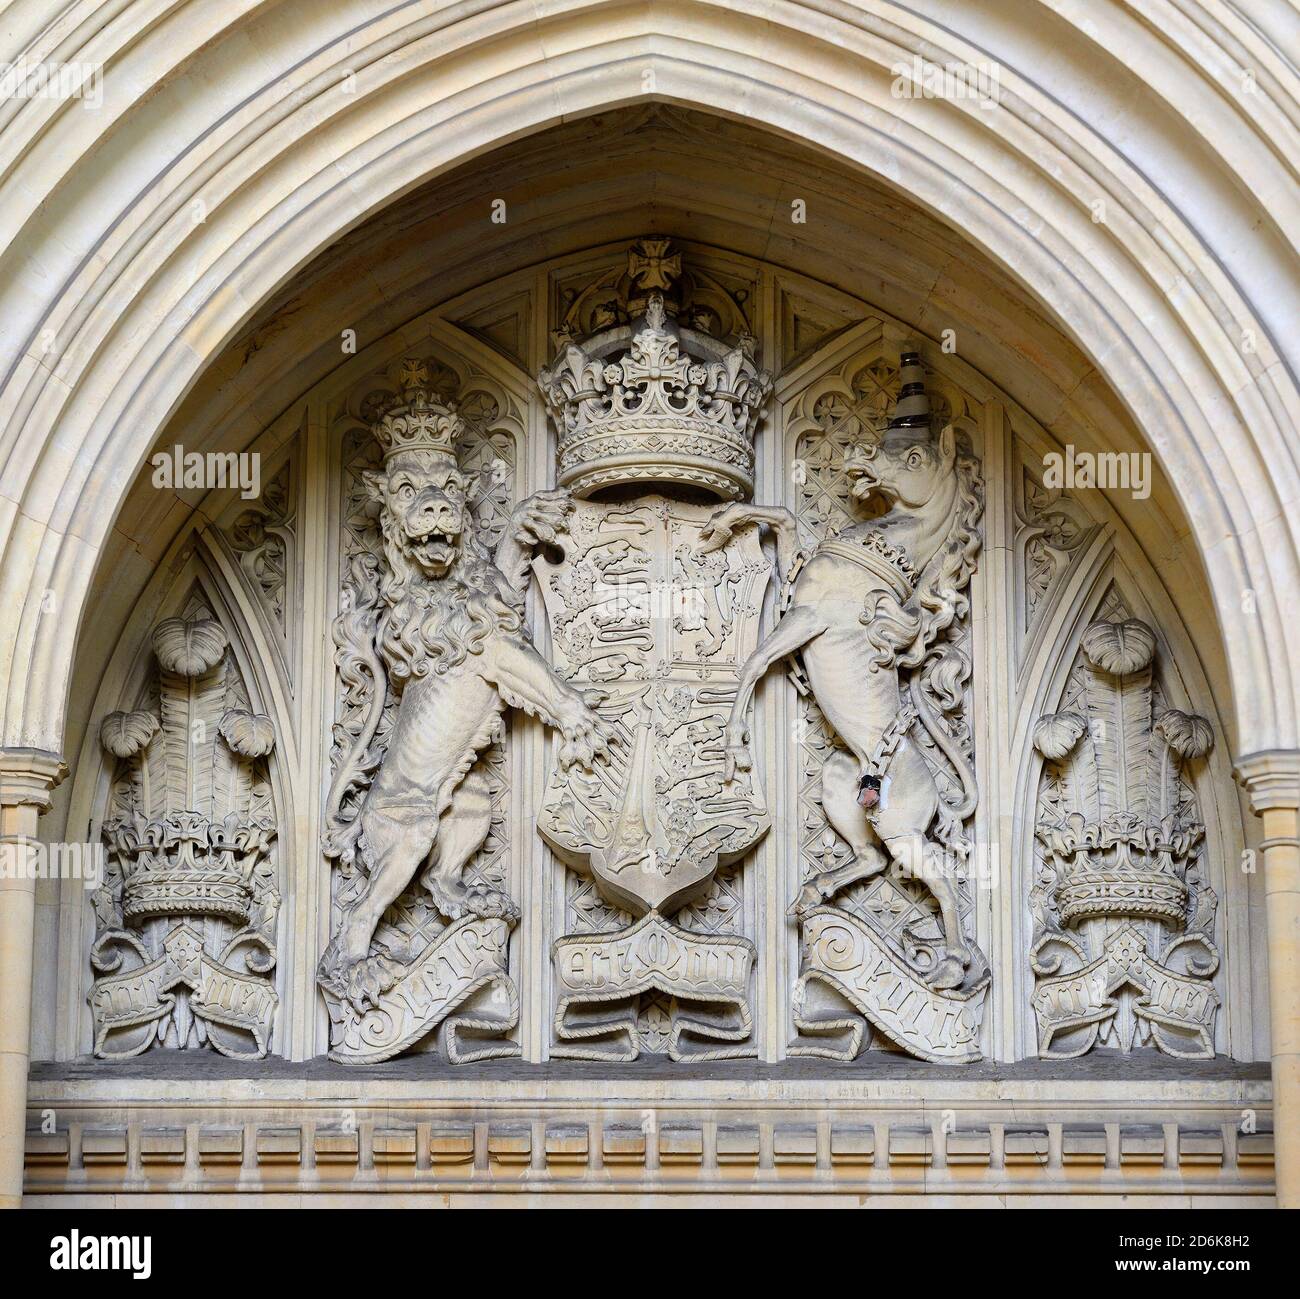 London, England, UK. Shield version of the British coat of arms above the Sovereign's Entrance to the Houses of Parliament, (Unicorn's horn under re.. Stock Photo